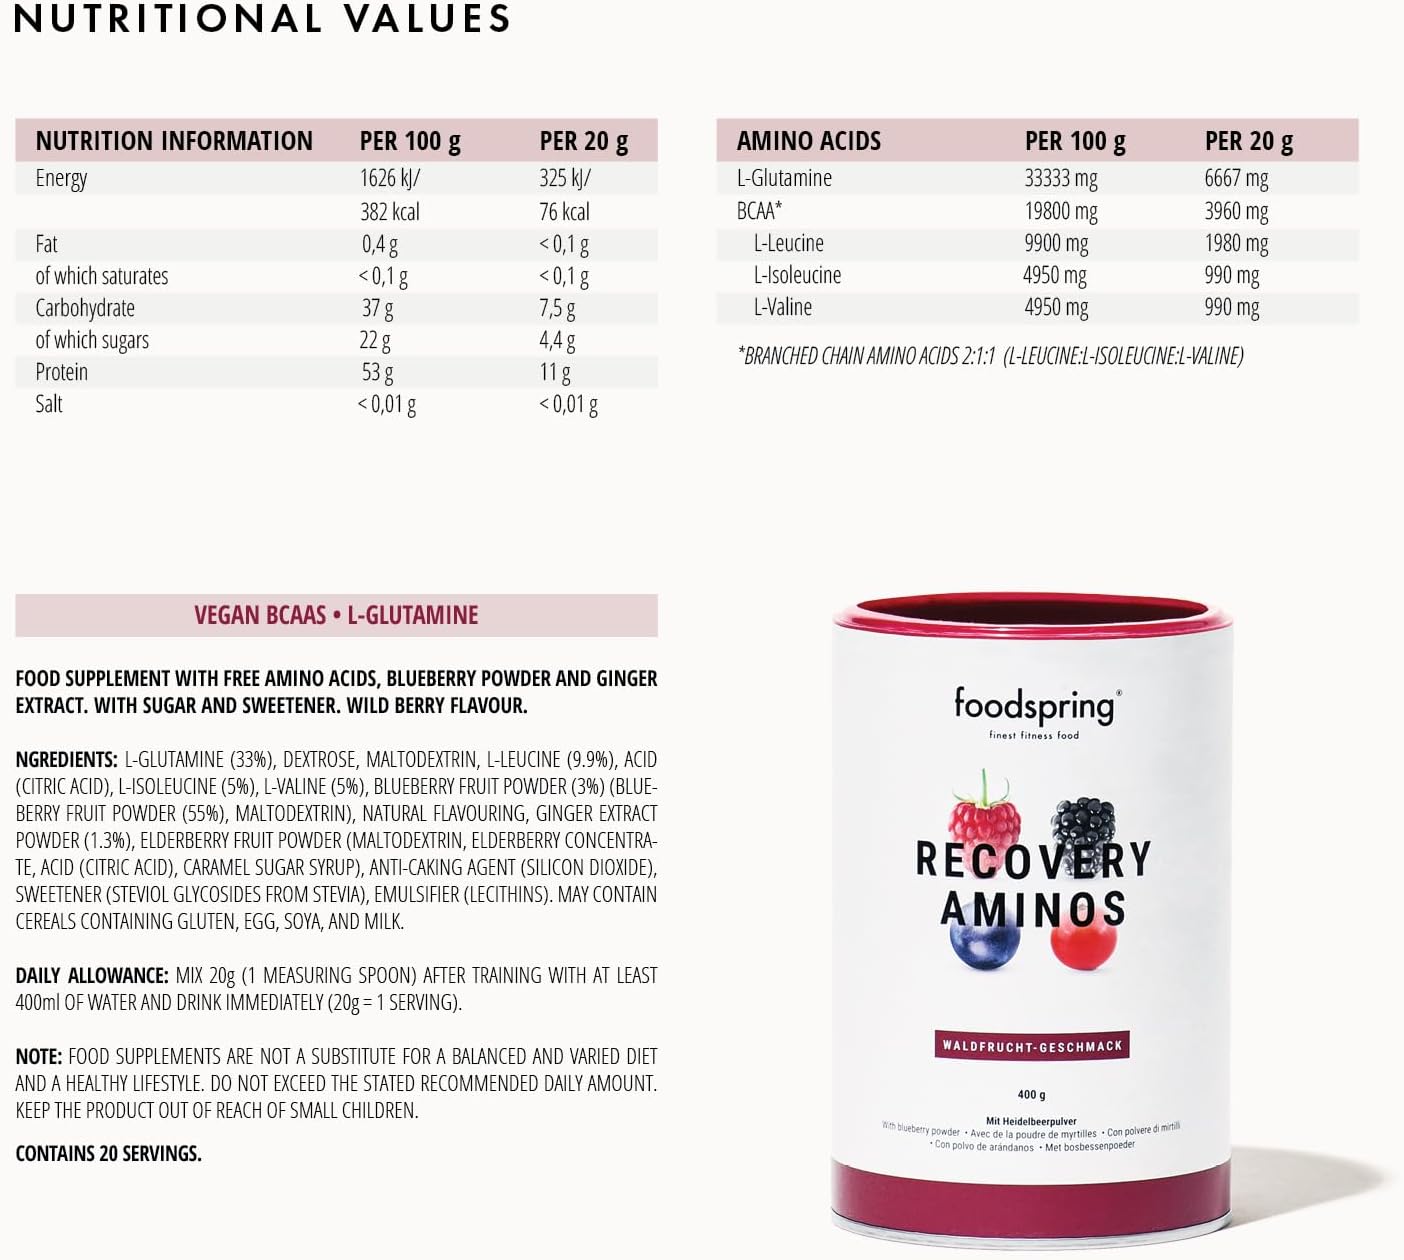 foodspring Recovery Aminos, 400g, Wild Berries, Clean Post-Workout Drink with Plant-Based BCAAs : Amazon.co.uk: Home & Kitchen